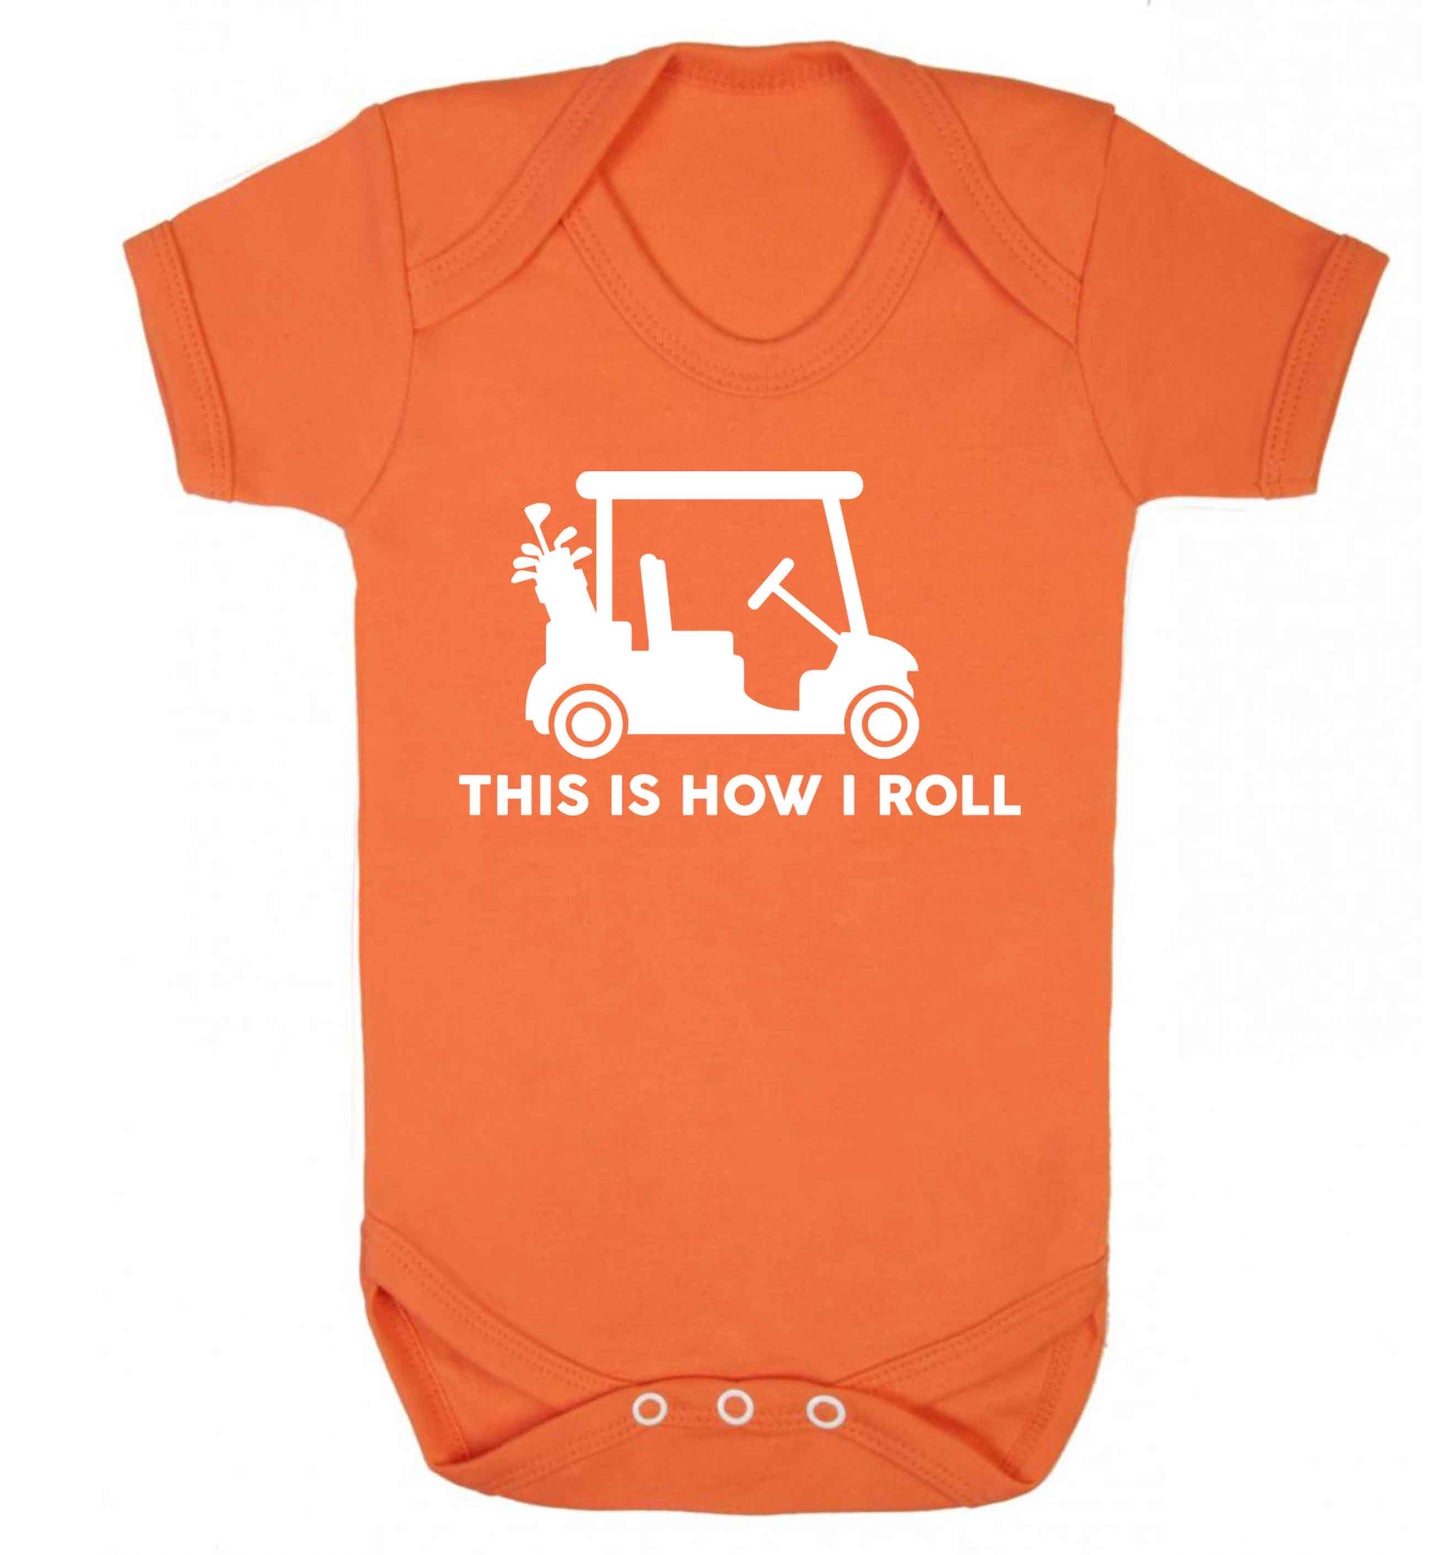 This is how I roll golf cart Baby Vest orange 18-24 months